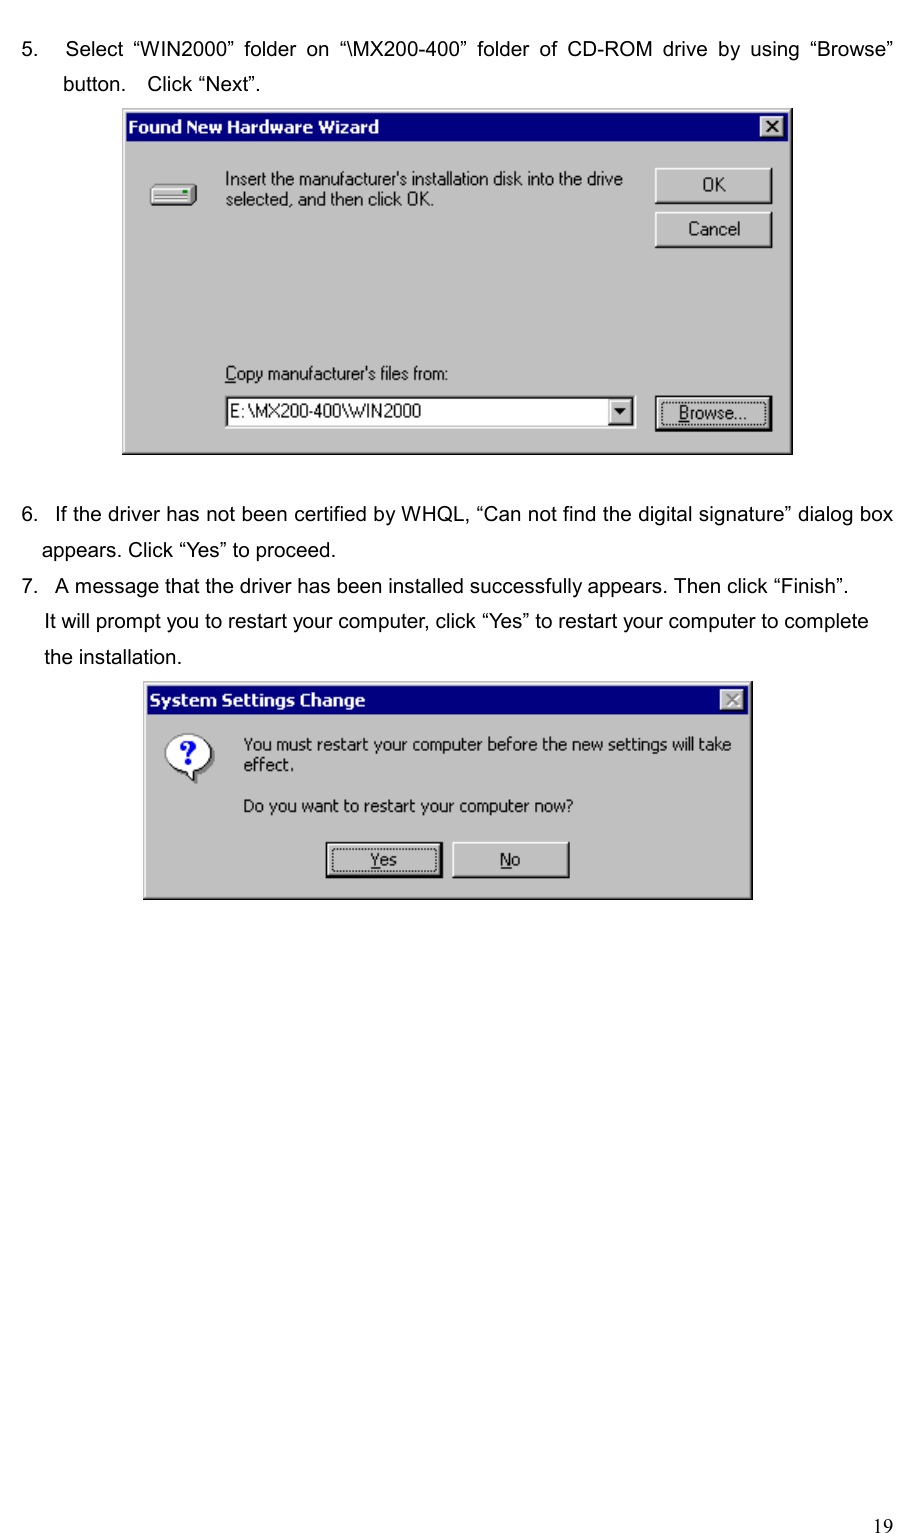     19 5.   Select “WIN2000” folder on “\MX200-400” folder of CD-ROM drive by using “Browse” button.  Click “Next”.   6.   If the driver has not been certified by WHQL, “Can not find the digital signature” dialog box appears. Click “Yes” to proceed. 7.   A message that the driver has been installed successfully appears. Then click “Finish”. It will prompt you to restart your computer, click “Yes” to restart your computer to complete   the installation.  